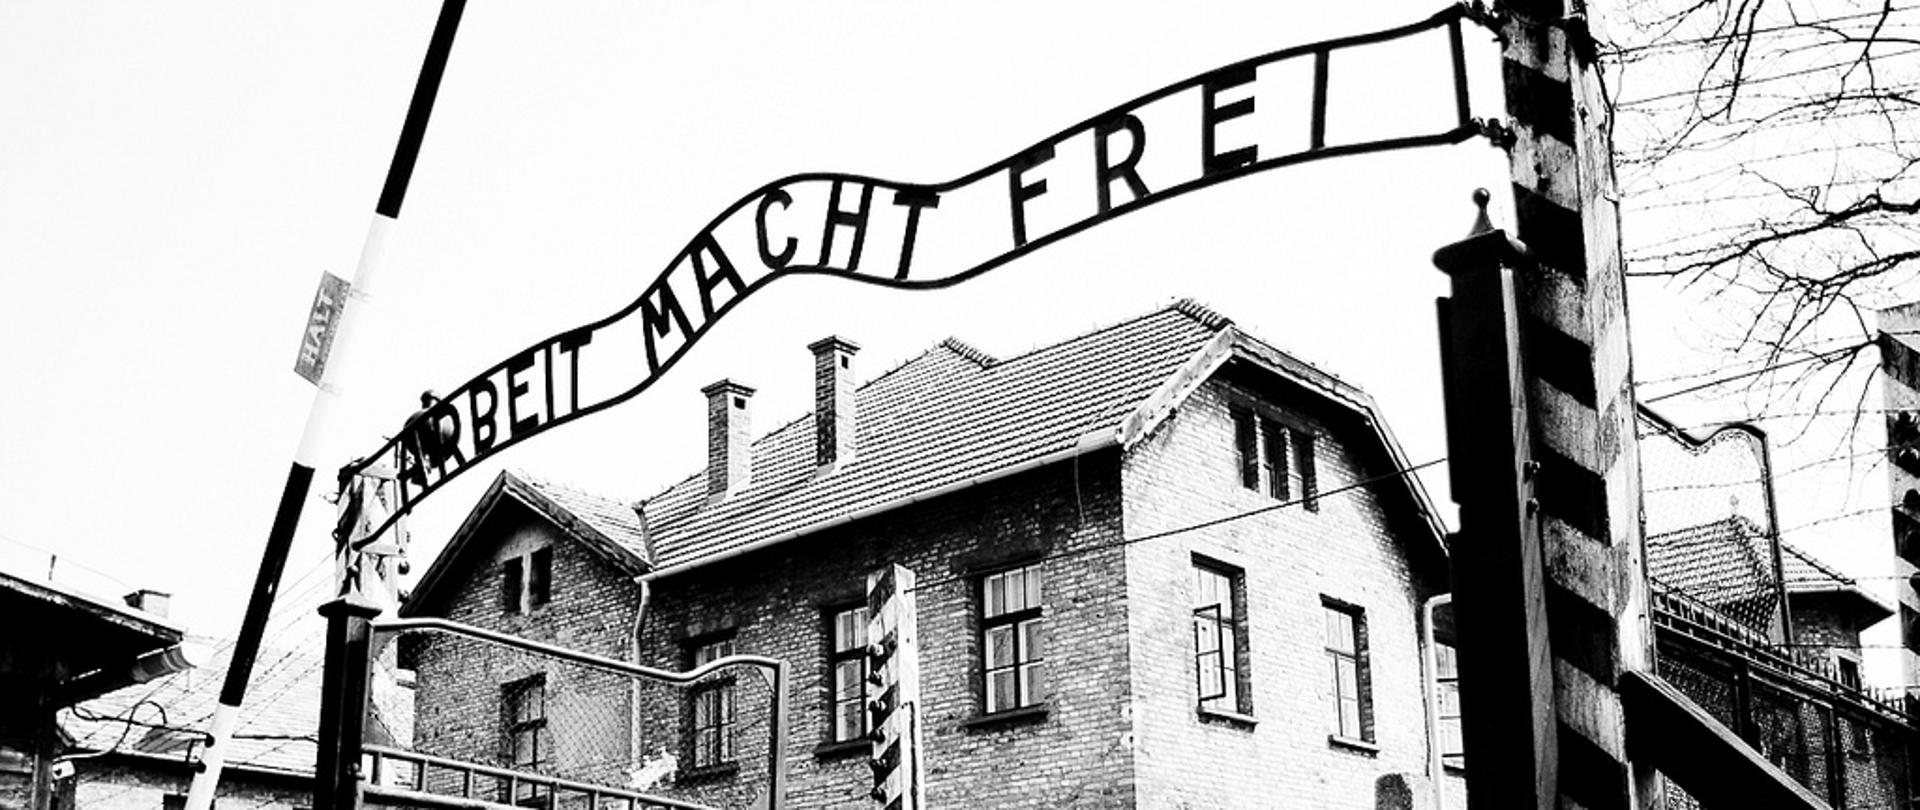 Auschwitz concentration camp entrance gate with the sentence "Arbeit macht frei" written above. 